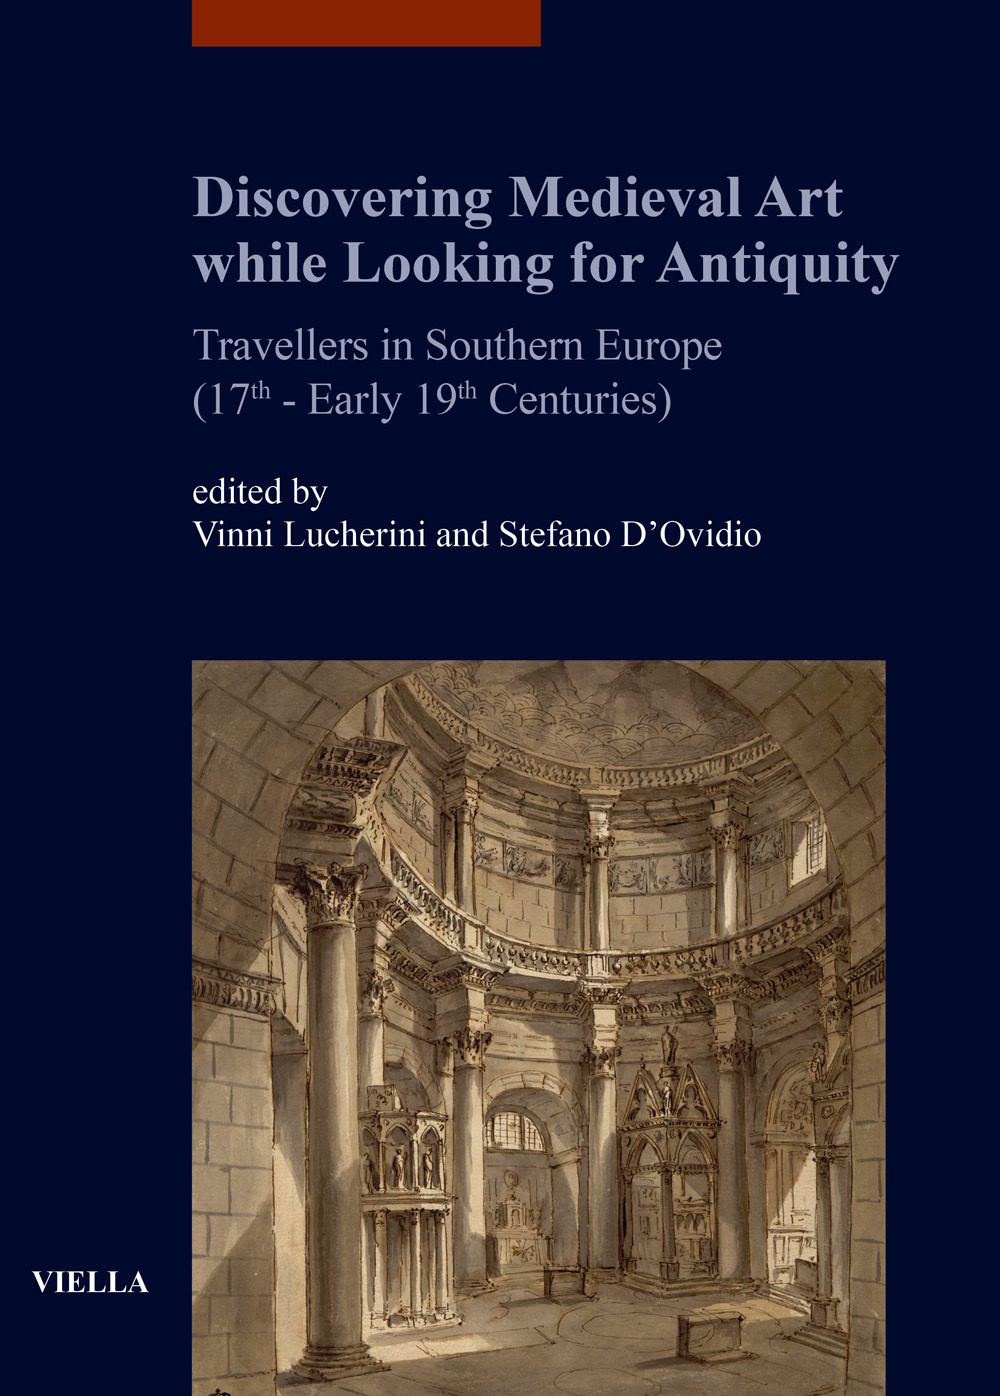 Discovering medieval art while looking for antiquity. Travellers in southern Europe (17th-early 19th centuries)